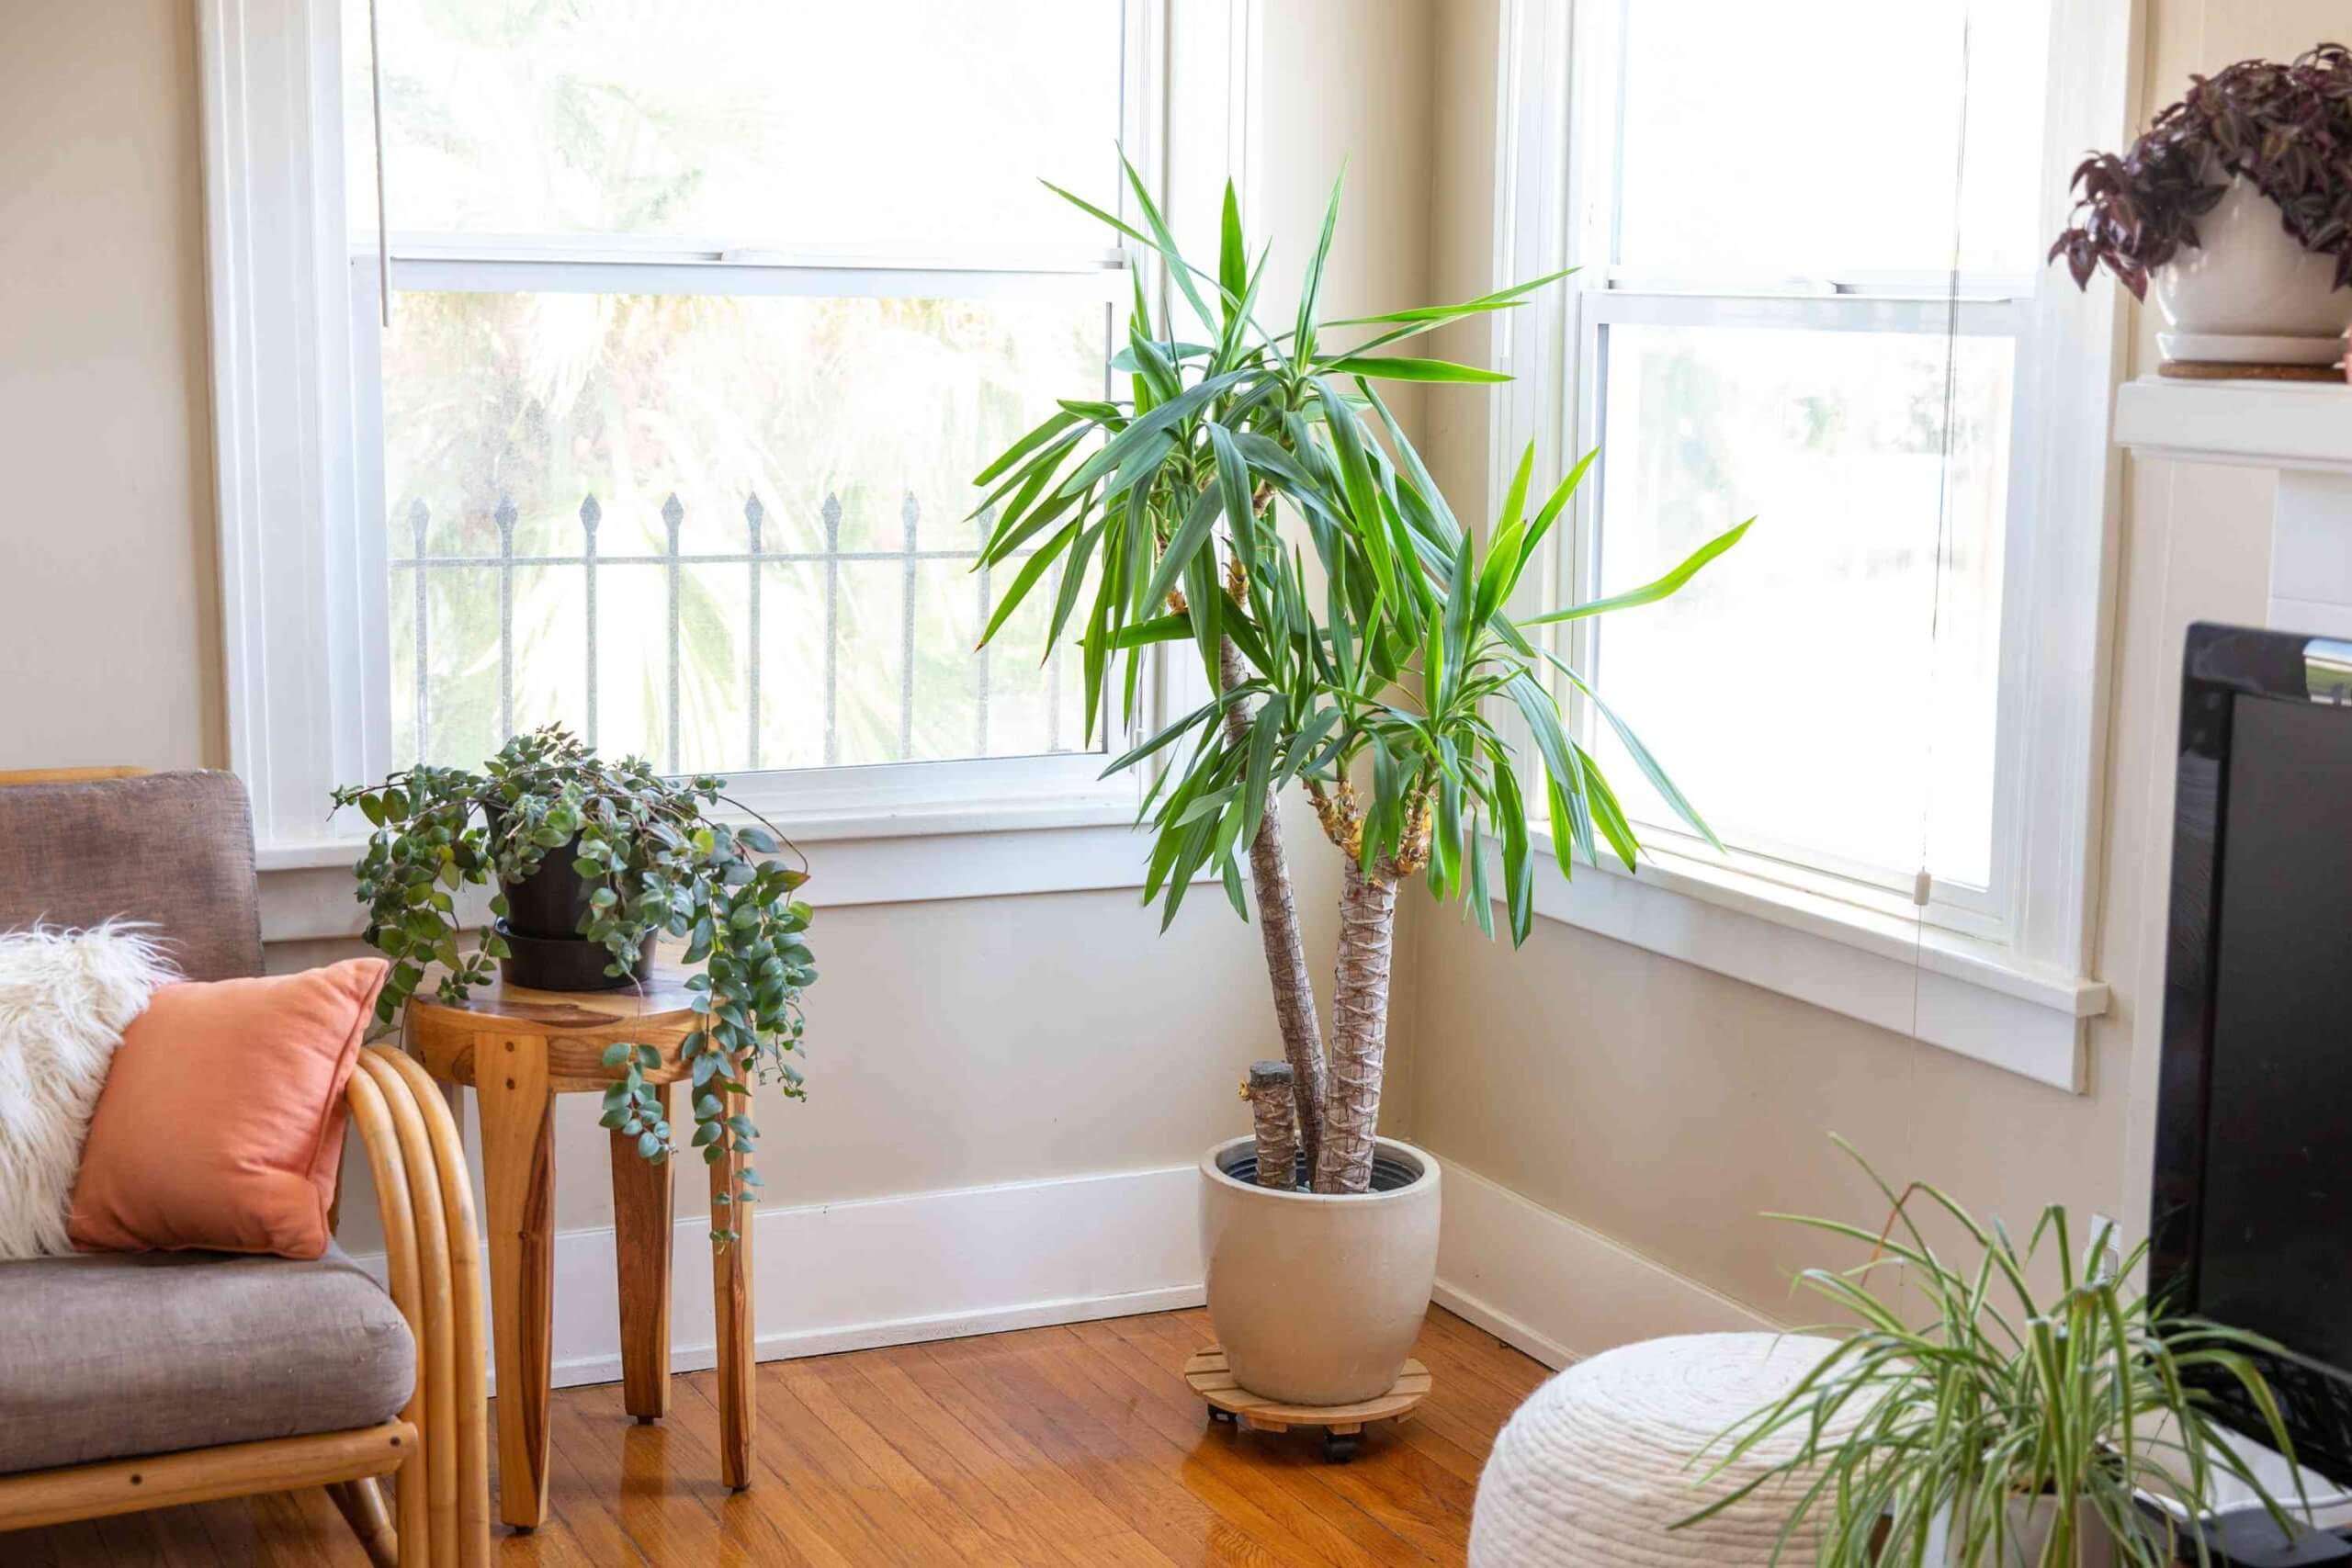 A cozy living room with a couch, chair, and a plant. The image showcases Yucca Seed Propagation